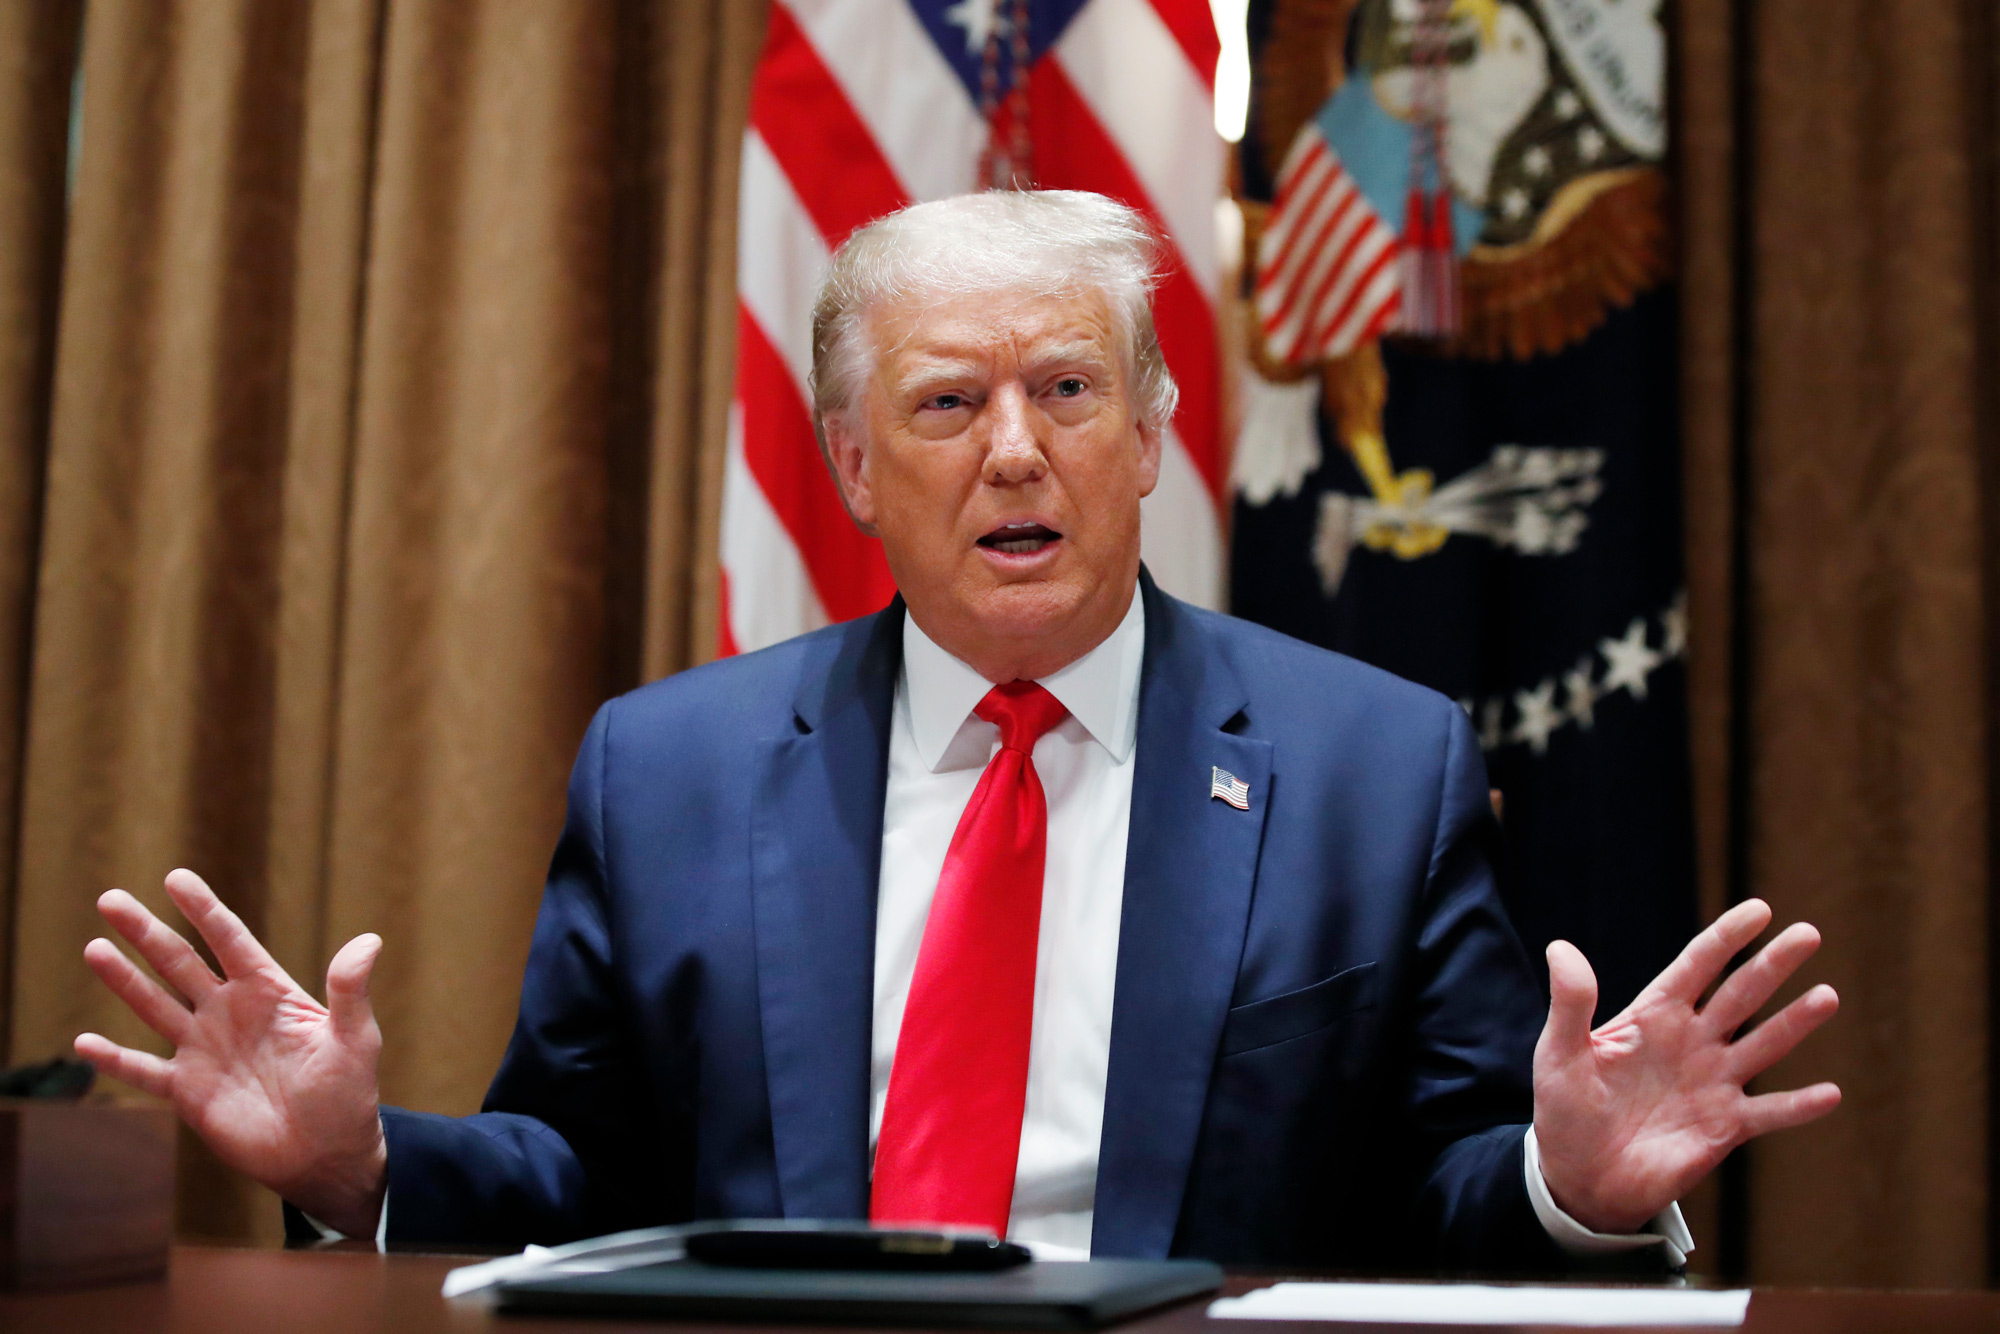 President Donald Trump speaks during a meeting before signing an Executive Order on hiring American workers, in the Cabinet Room of the White House on Aug. 3 in Washington, DC.